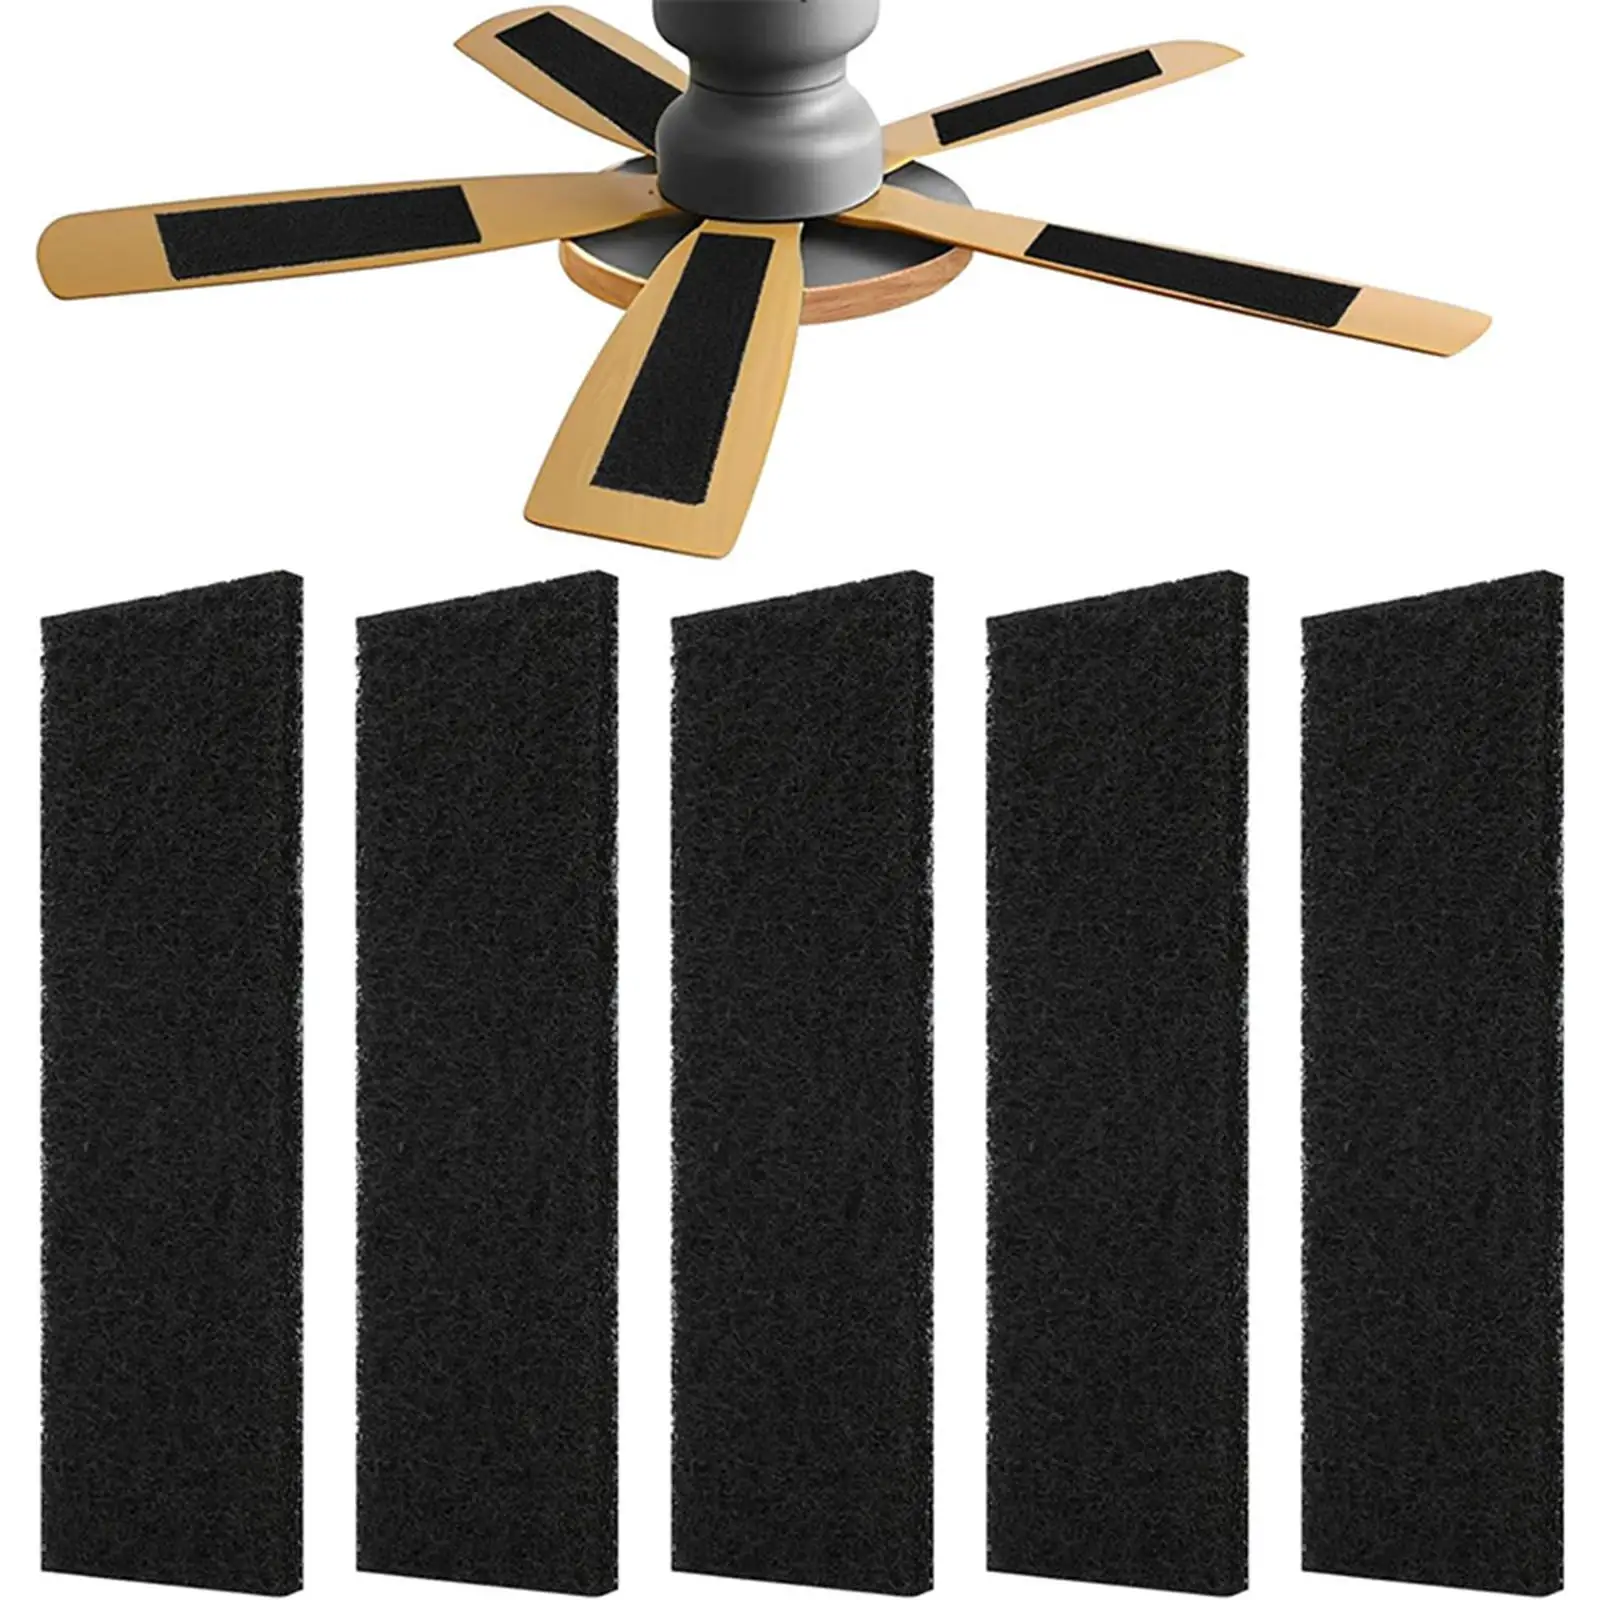 Ceiling Fan Filter Set with Blades, Air Filter for Ceiling, Living Room,